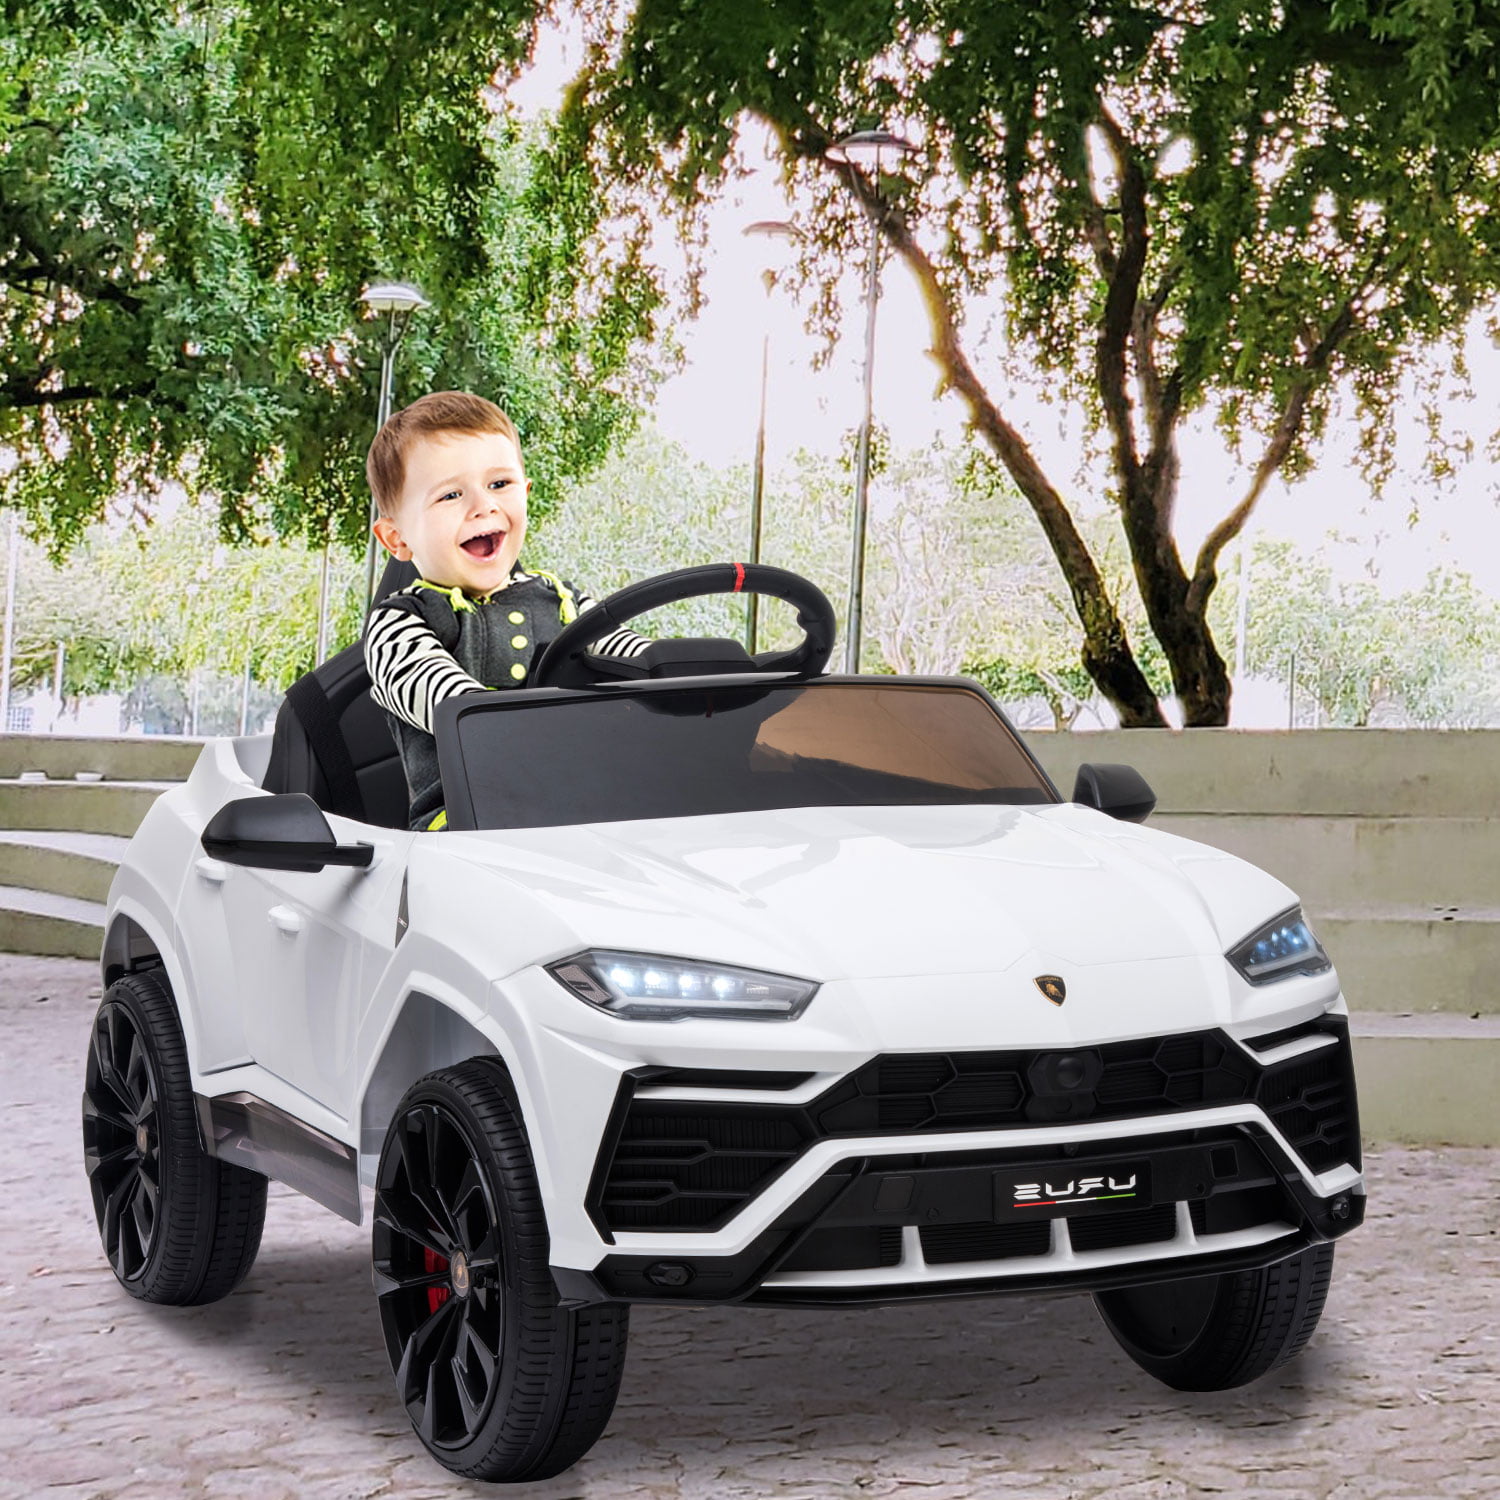 Sounds Years Old Driving Battery Operated Car Toy W/ Parent Remote-Control LED Lights Black for Toddler Little Brown Box Kids 12V Licensed Lamborghini Urus Ride on Truck 1,2,3,4 2 Speeds 